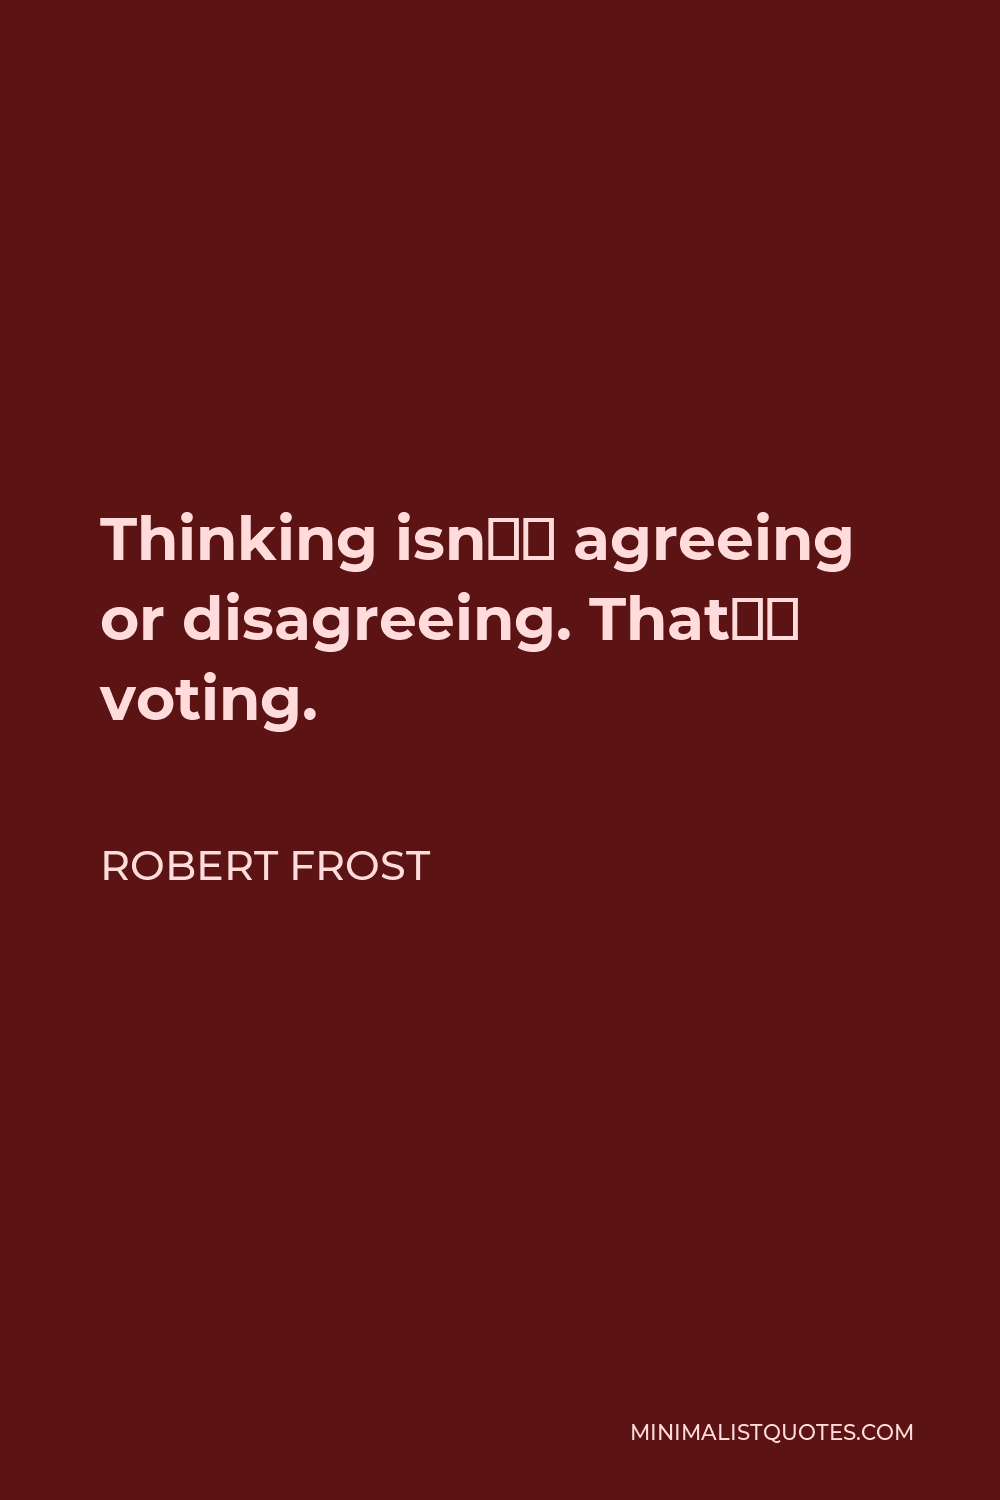 Robert Frost Quote - Thinking isn’t agreeing or disagreeing. That’s voting.